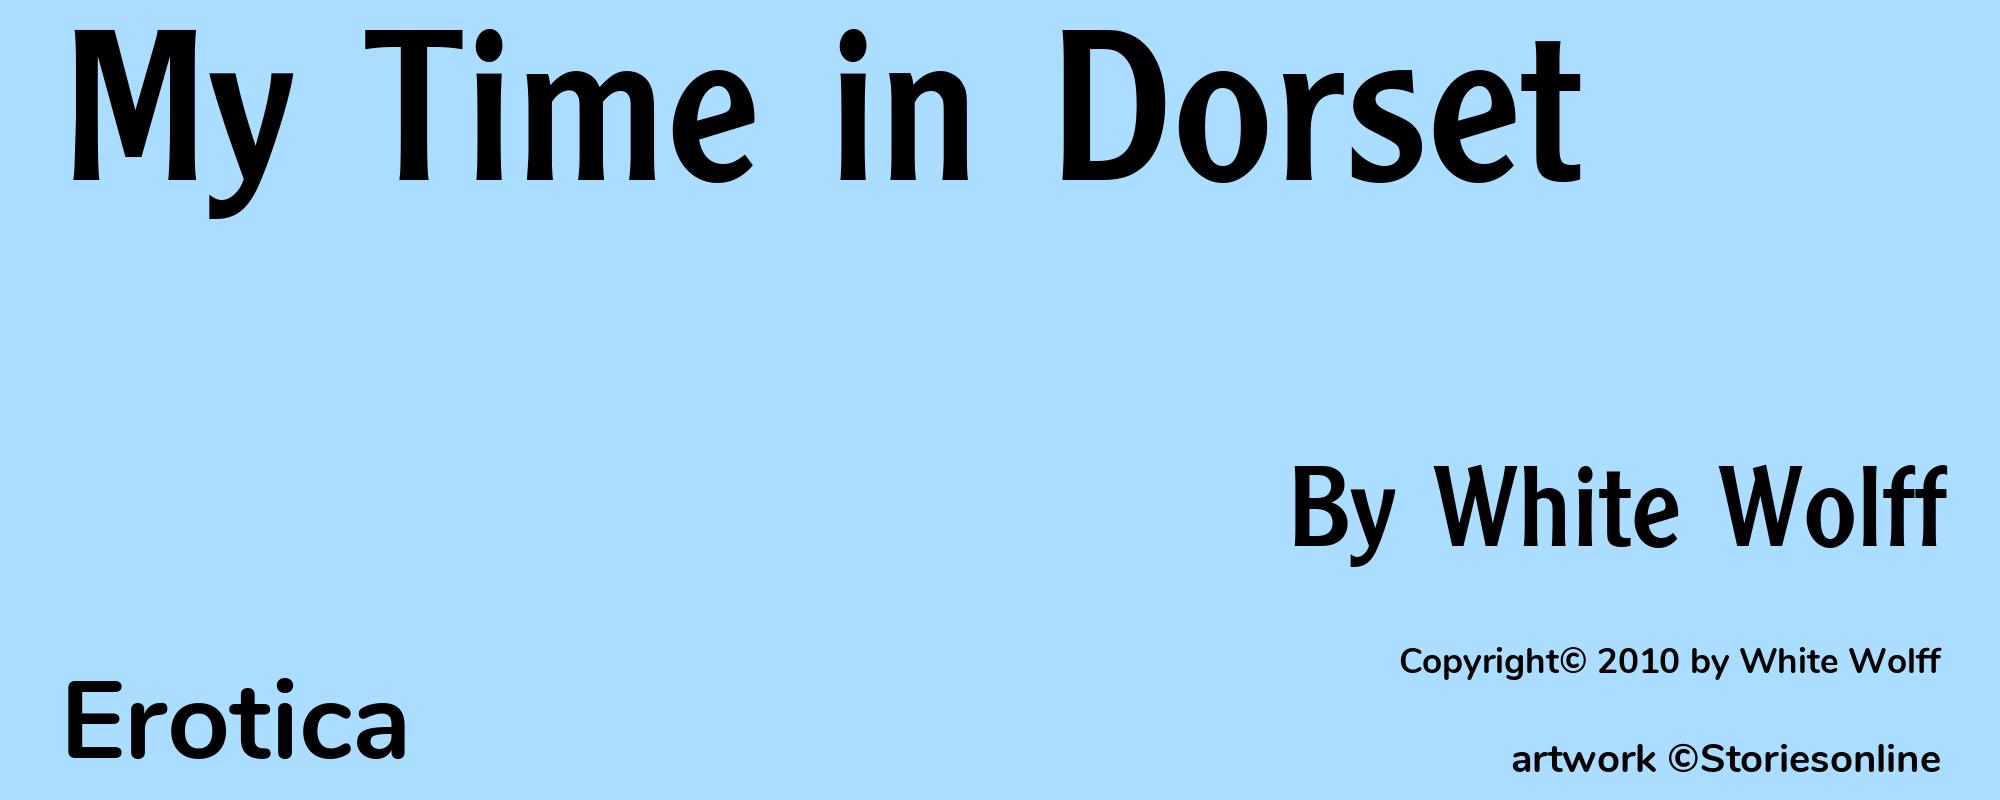 My Time in Dorset - Cover